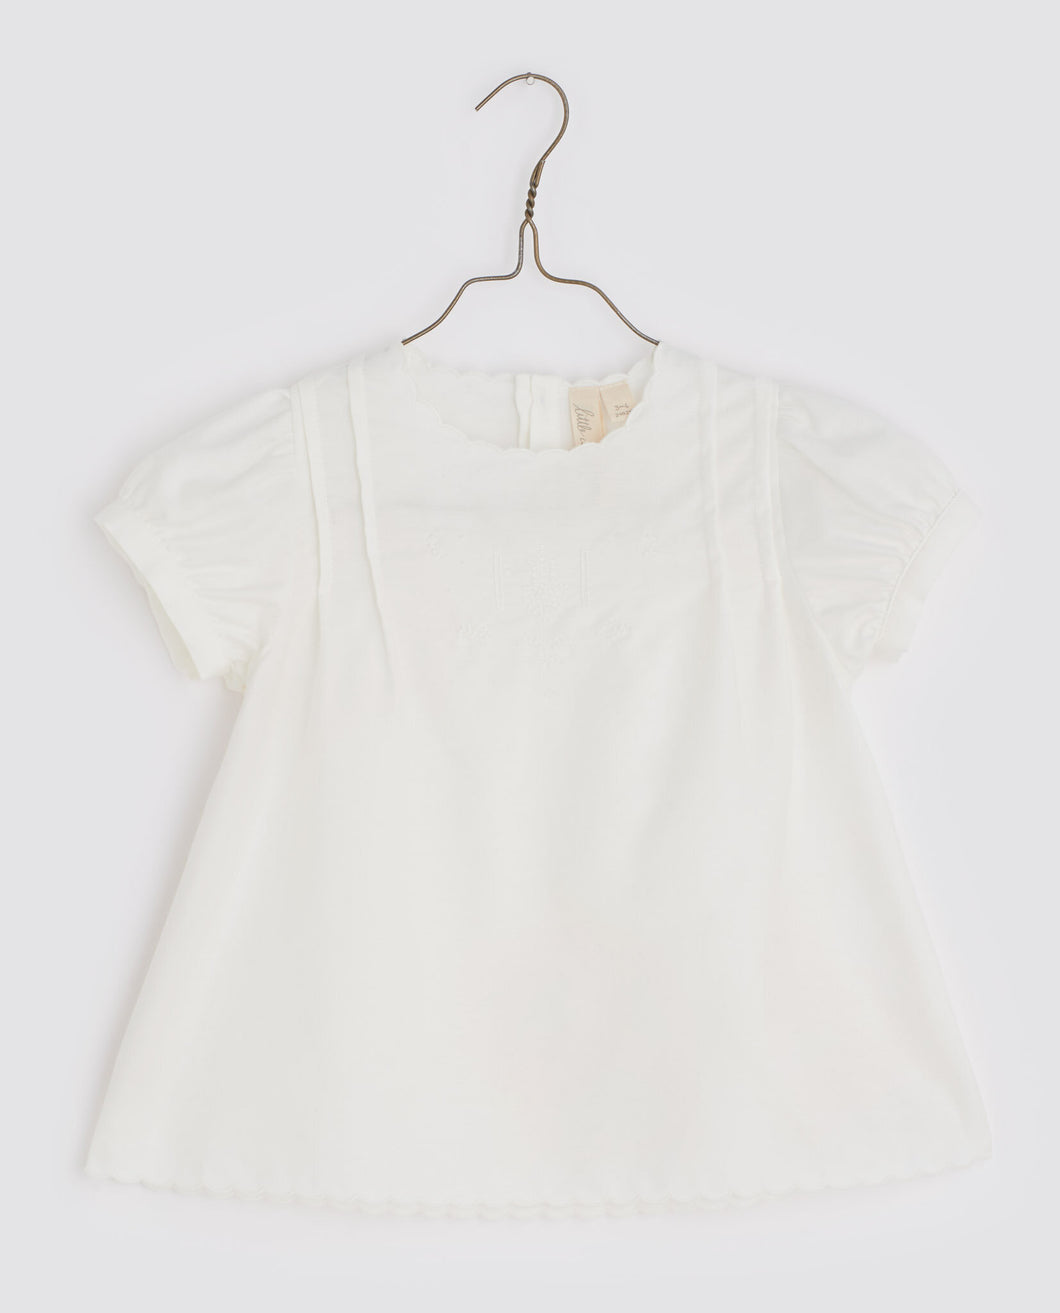 Little Cotton Clothes Beth Blouse - Embroidered White - 2/3Y, 3/4Y